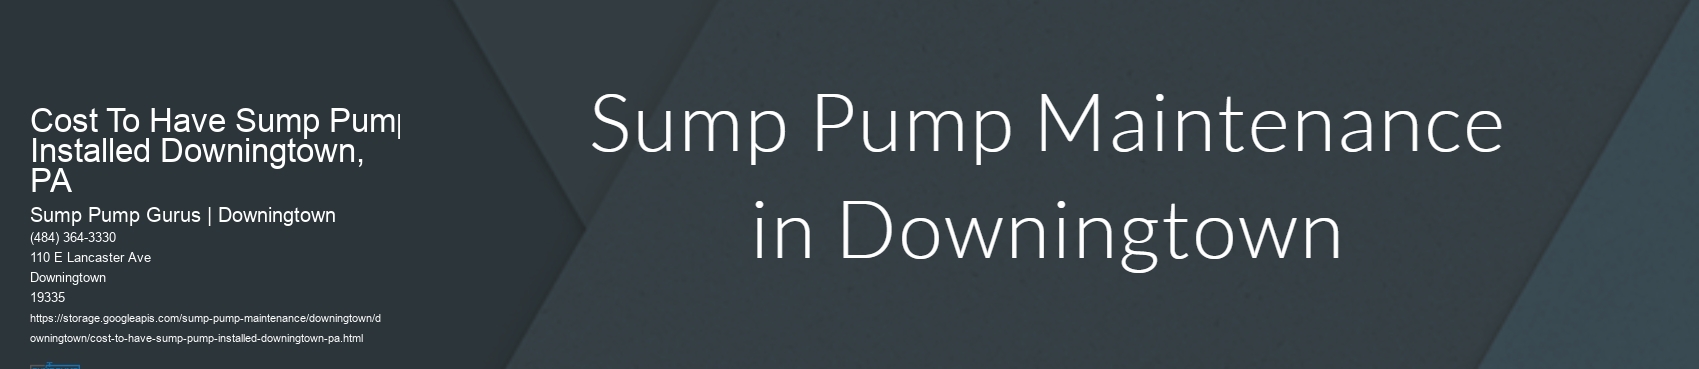 Cost To Have Sump Pump Installed Downingtown, PA